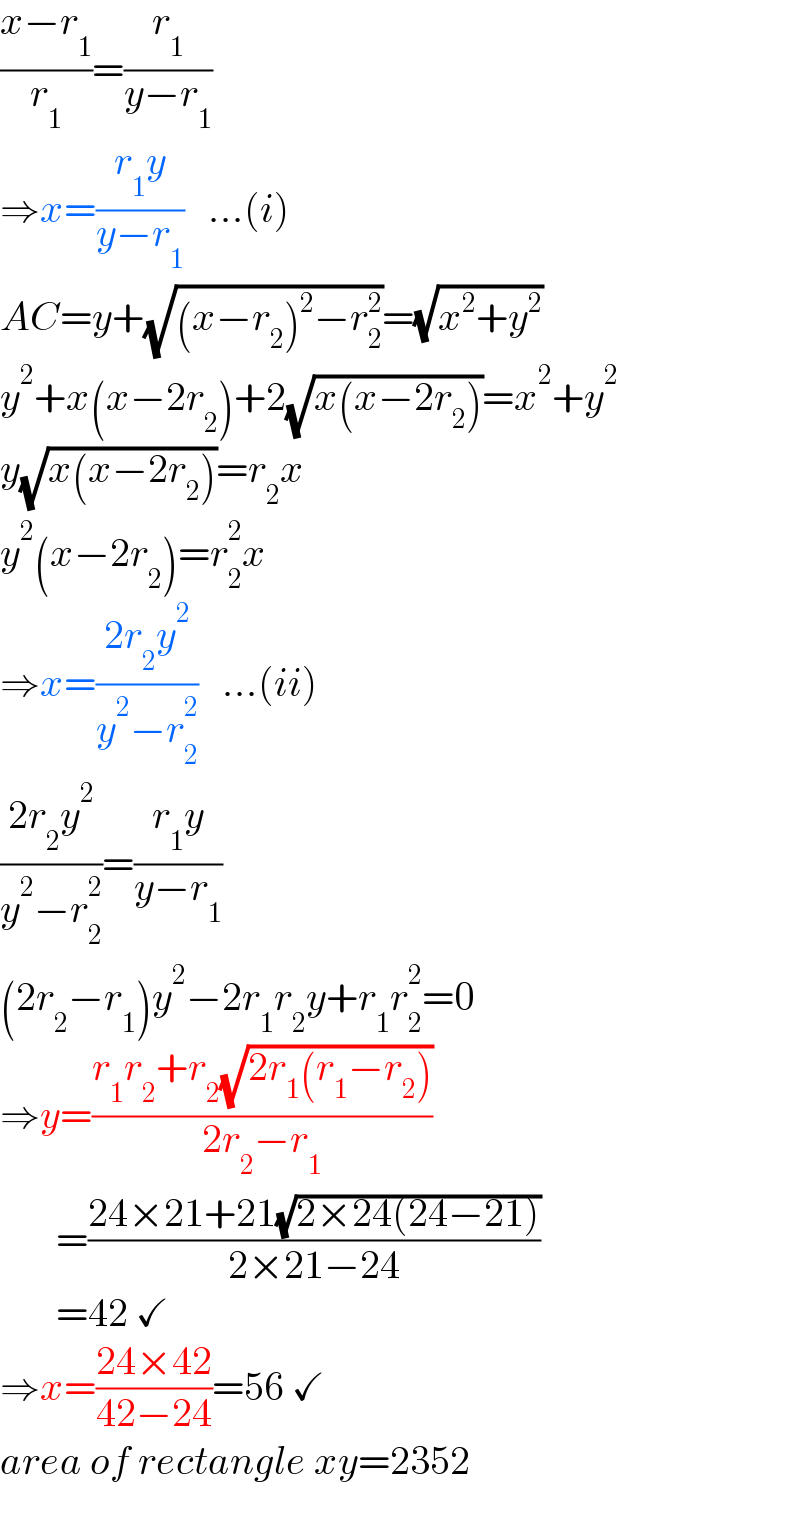 ((x−r_1 )/r_1 )=(r_1 /(y−r_1 ))  ⇒x=((r_1 y)/(y−r_1 ))   ...(i)  AC=y+(√((x−r_2 )^2 −r_2 ^2 ))=(√(x^2 +y^2 ))  y^2 +x(x−2r_2 )+2(√(x(x−2r_2 )))=x^2 +y^2   y(√(x(x−2r_2 )))=r_2 x  y^2 (x−2r_2 )=r_2 ^2 x  ⇒x=((2r_2 y^2 )/(y^2 −r_2 ^2 ))   ...(ii)  ((2r_2 y^2 )/(y^2 −r_2 ^2 ))=((r_1 y)/(y−r_1 ))   (2r_2 −r_1 )y^2 −2r_1 r_2 y+r_1 r_2 ^2 =0  ⇒y=((r_1 r_2 +r_2 (√(2r_1 (r_1 −r_2 ))))/(2r_2 −r_1 ))         =((24×21+21(√(2×24(24−21))))/(2×21−24))         =42 ✓  ⇒x=((24×42)/(42−24))=56 ✓  area of rectangle xy=2352  